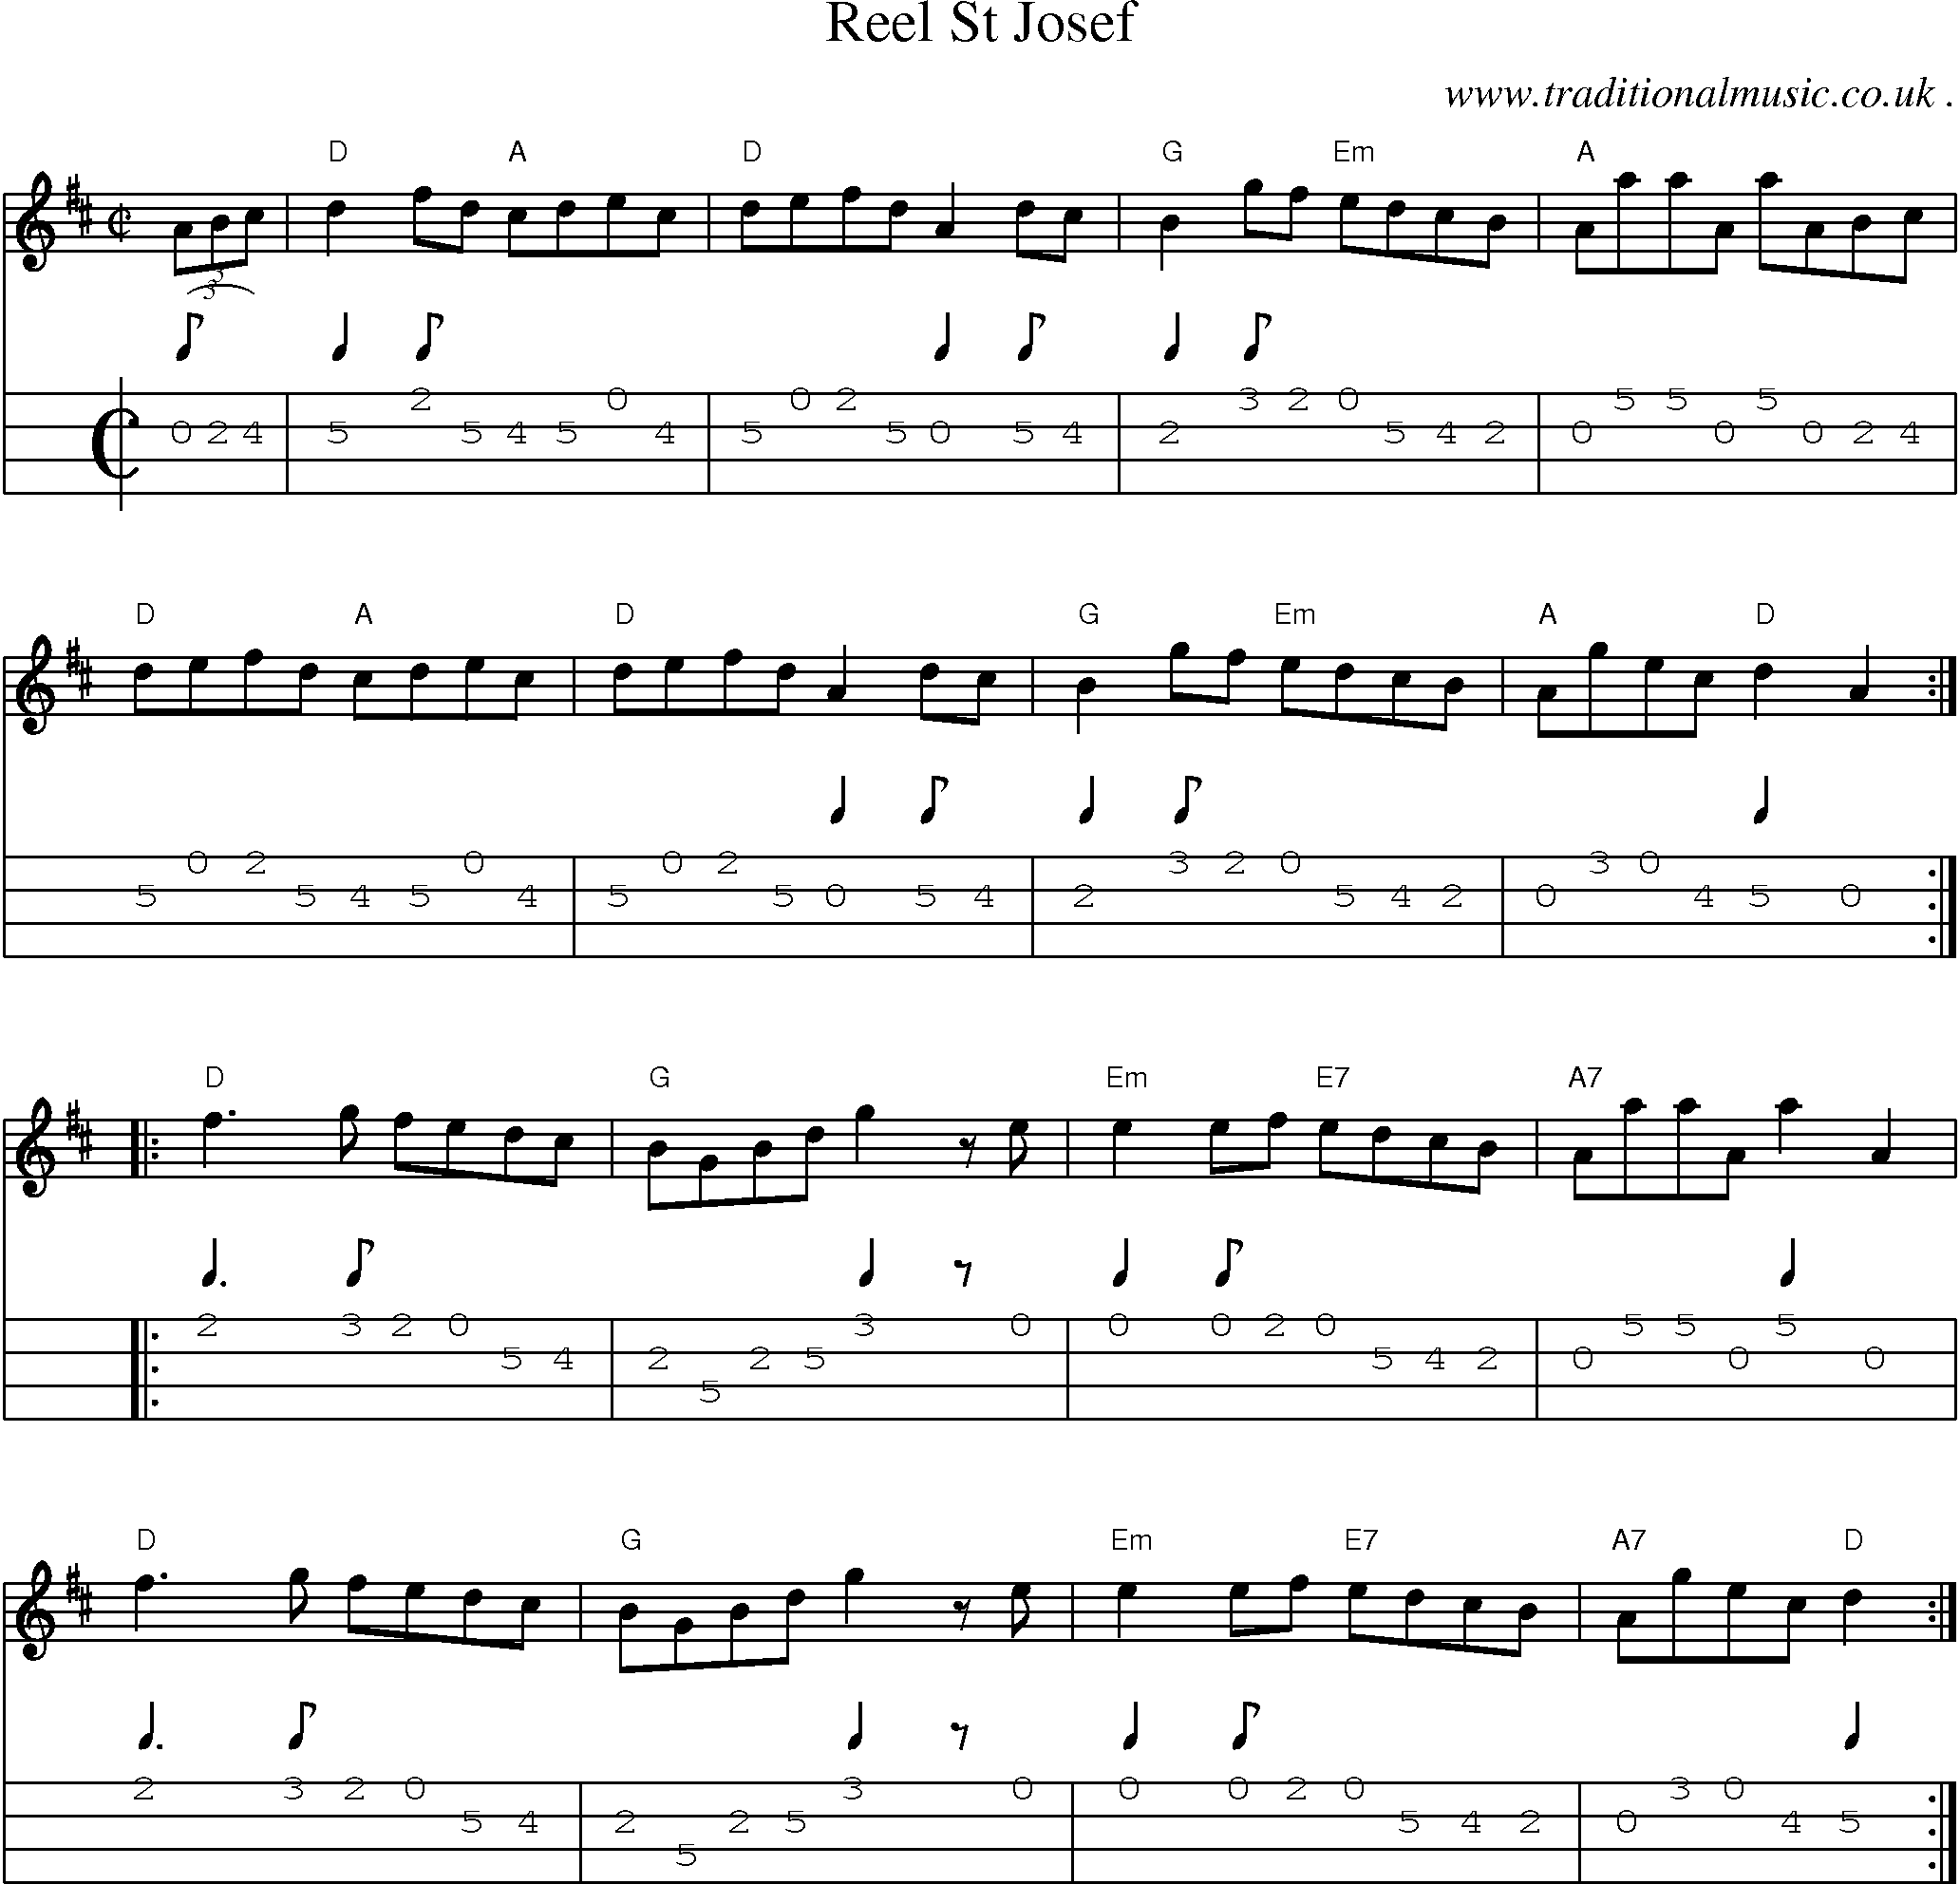 Music Score and Guitar Tabs for Reel St Josef